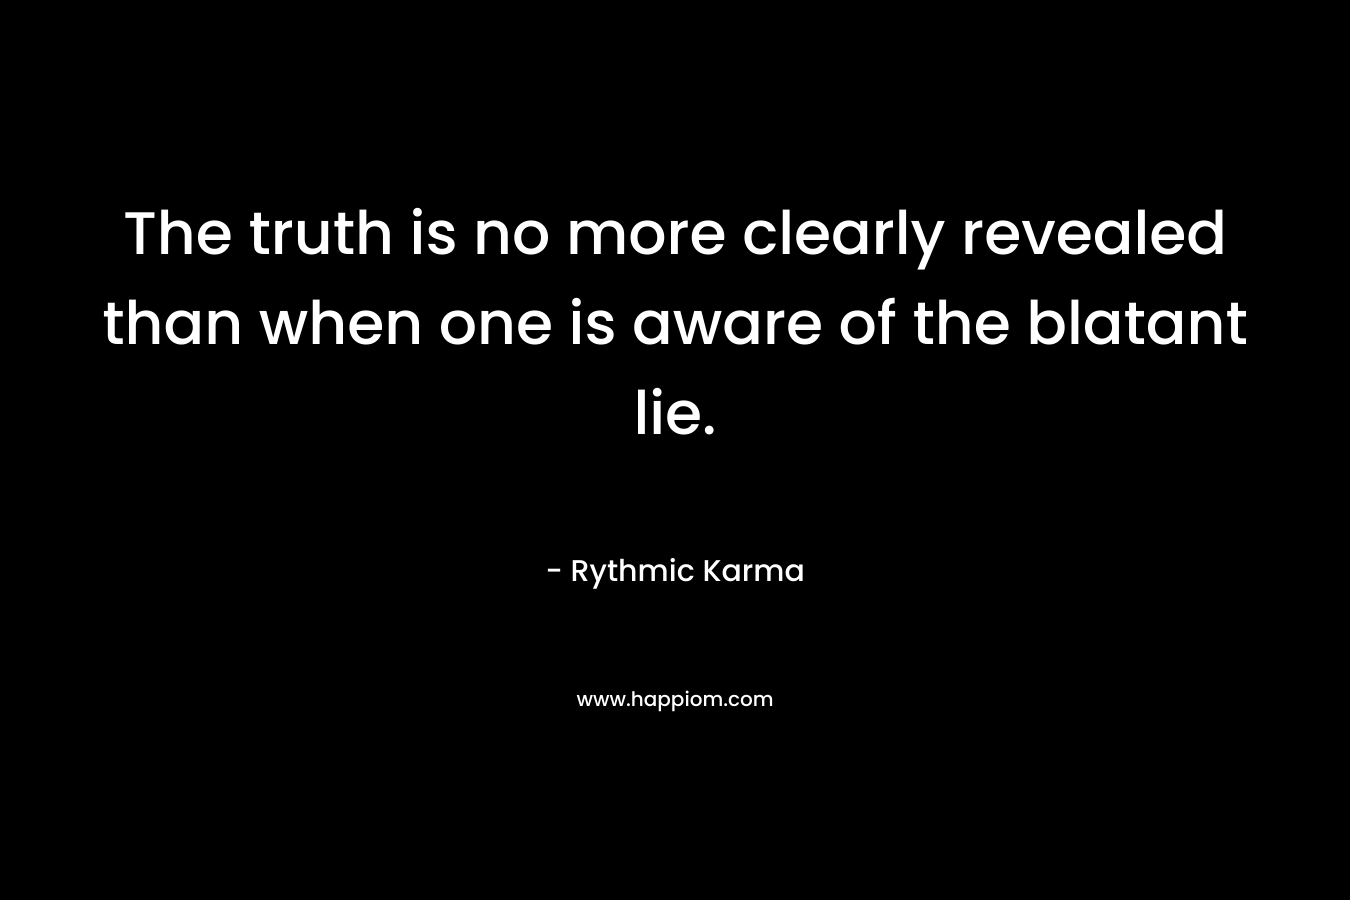 The truth is no more clearly revealed than when one is aware of the blatant lie.